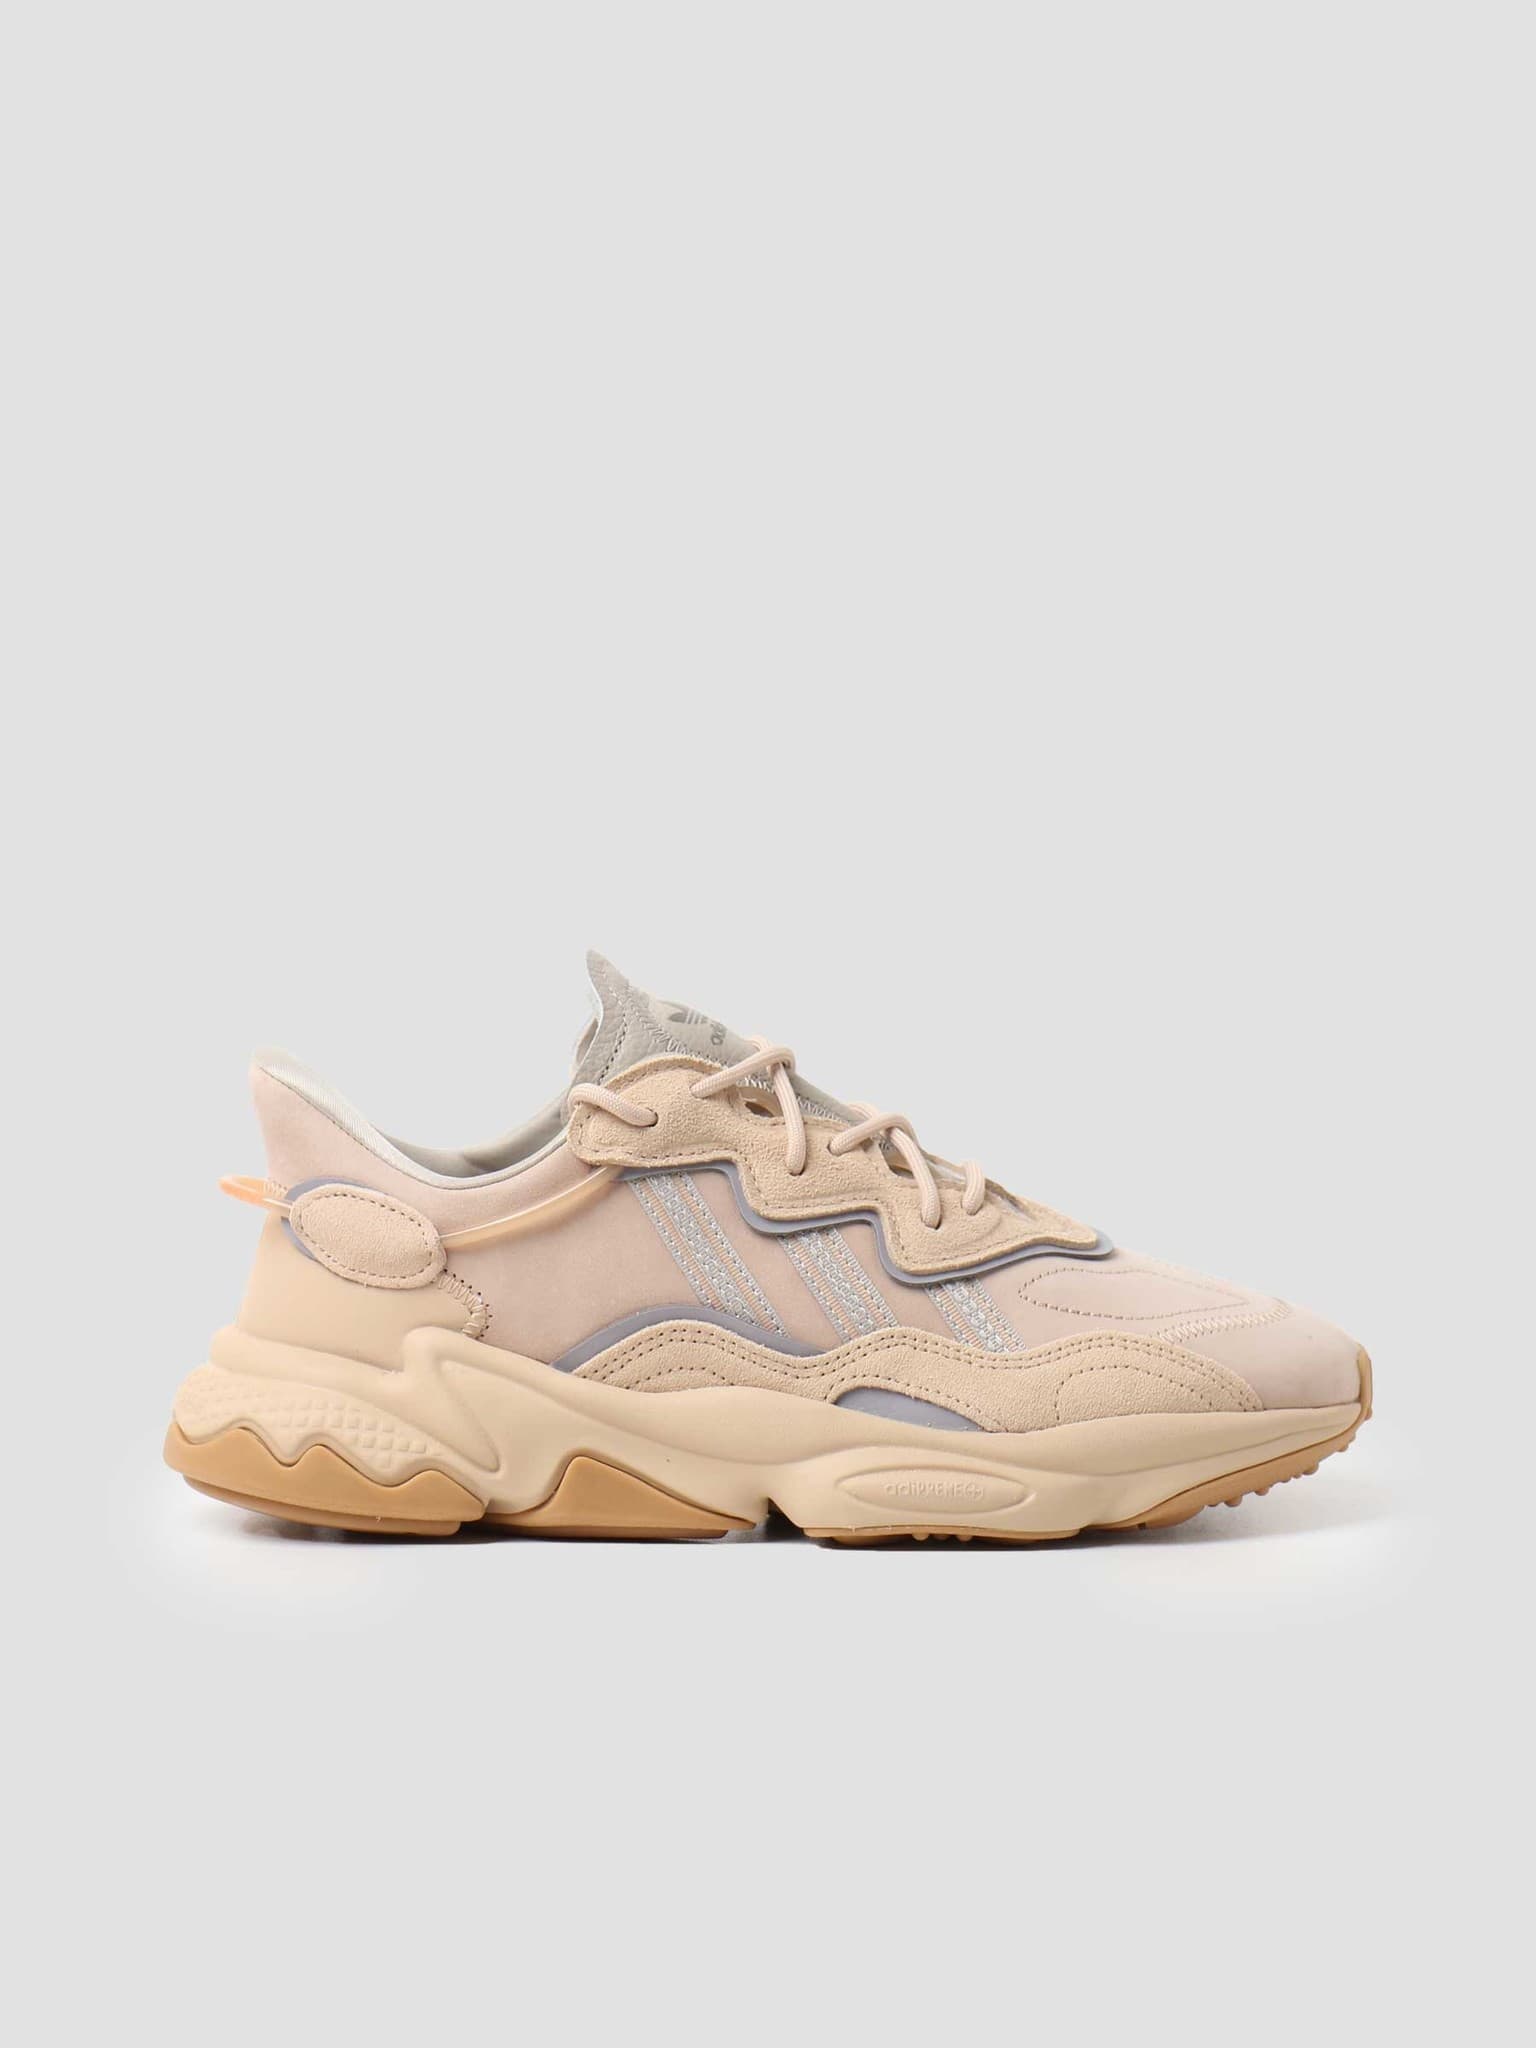 Adidas Ozweego St Pale Nude Light Brown Solal Red Freshcotton